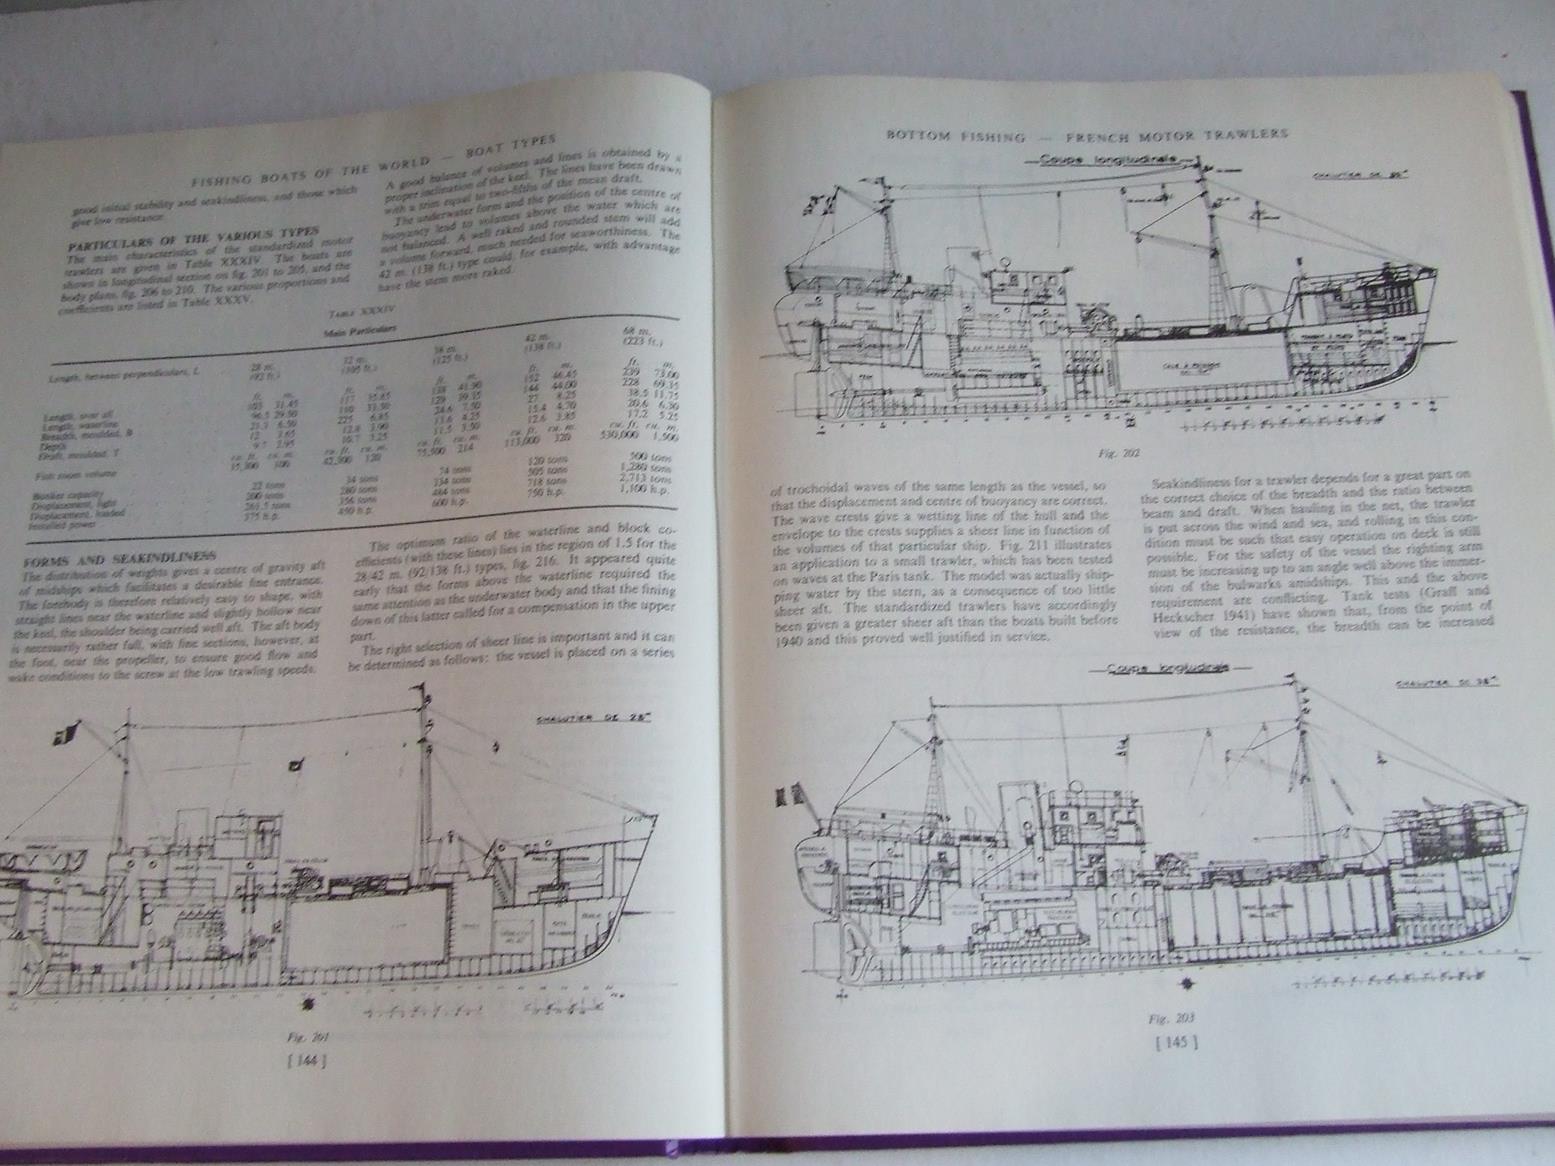 Fishing Boats of the World, volumes 1, 2 & 3